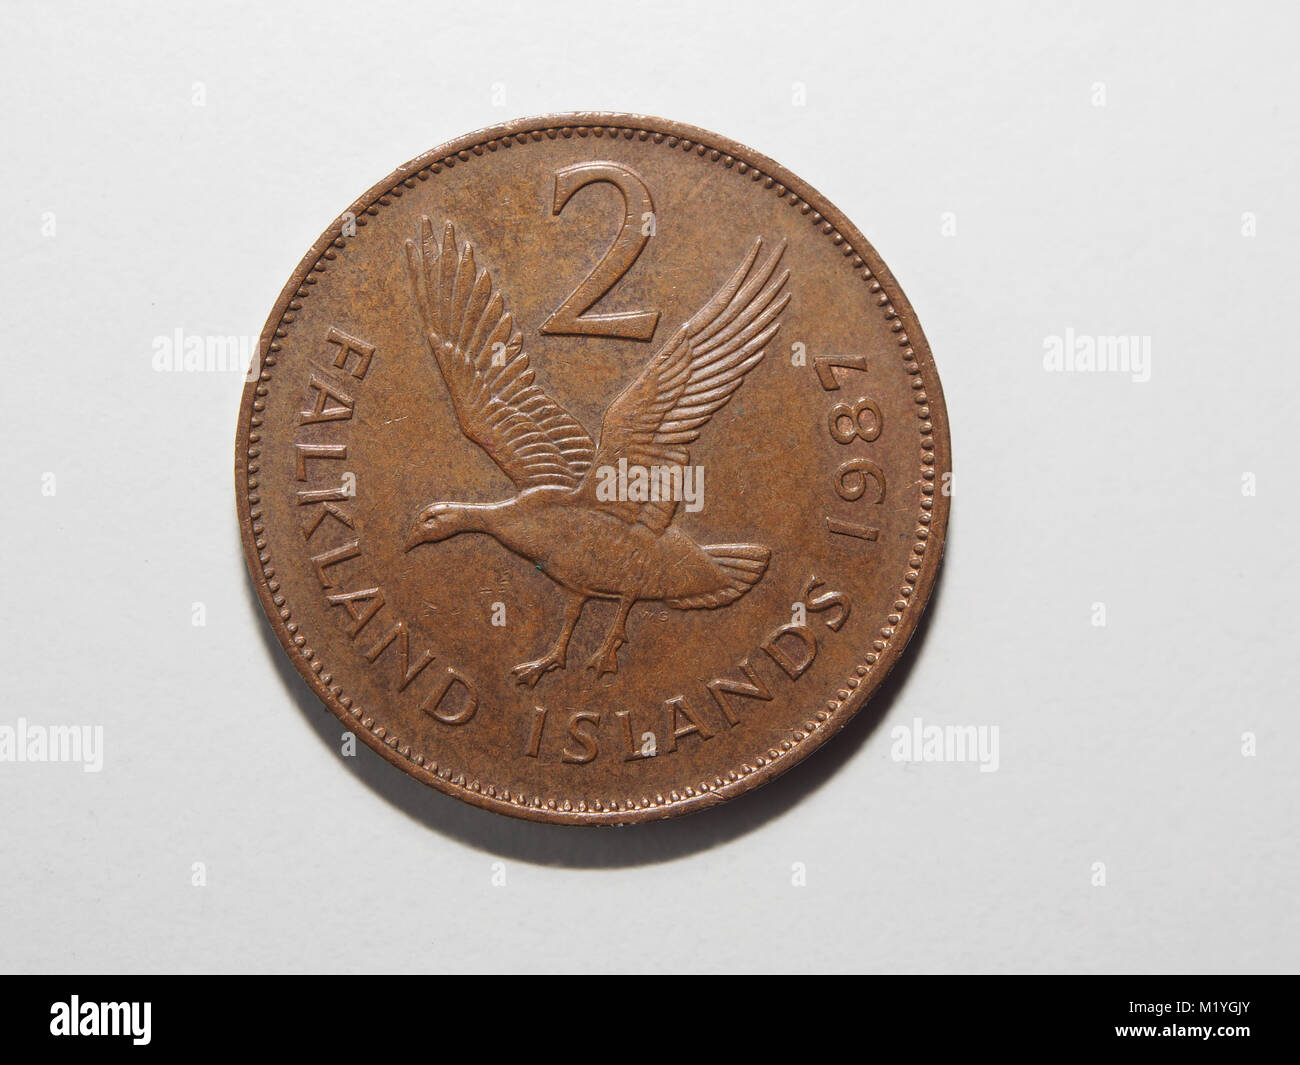 A falkland islands two pence coin Stock Photo